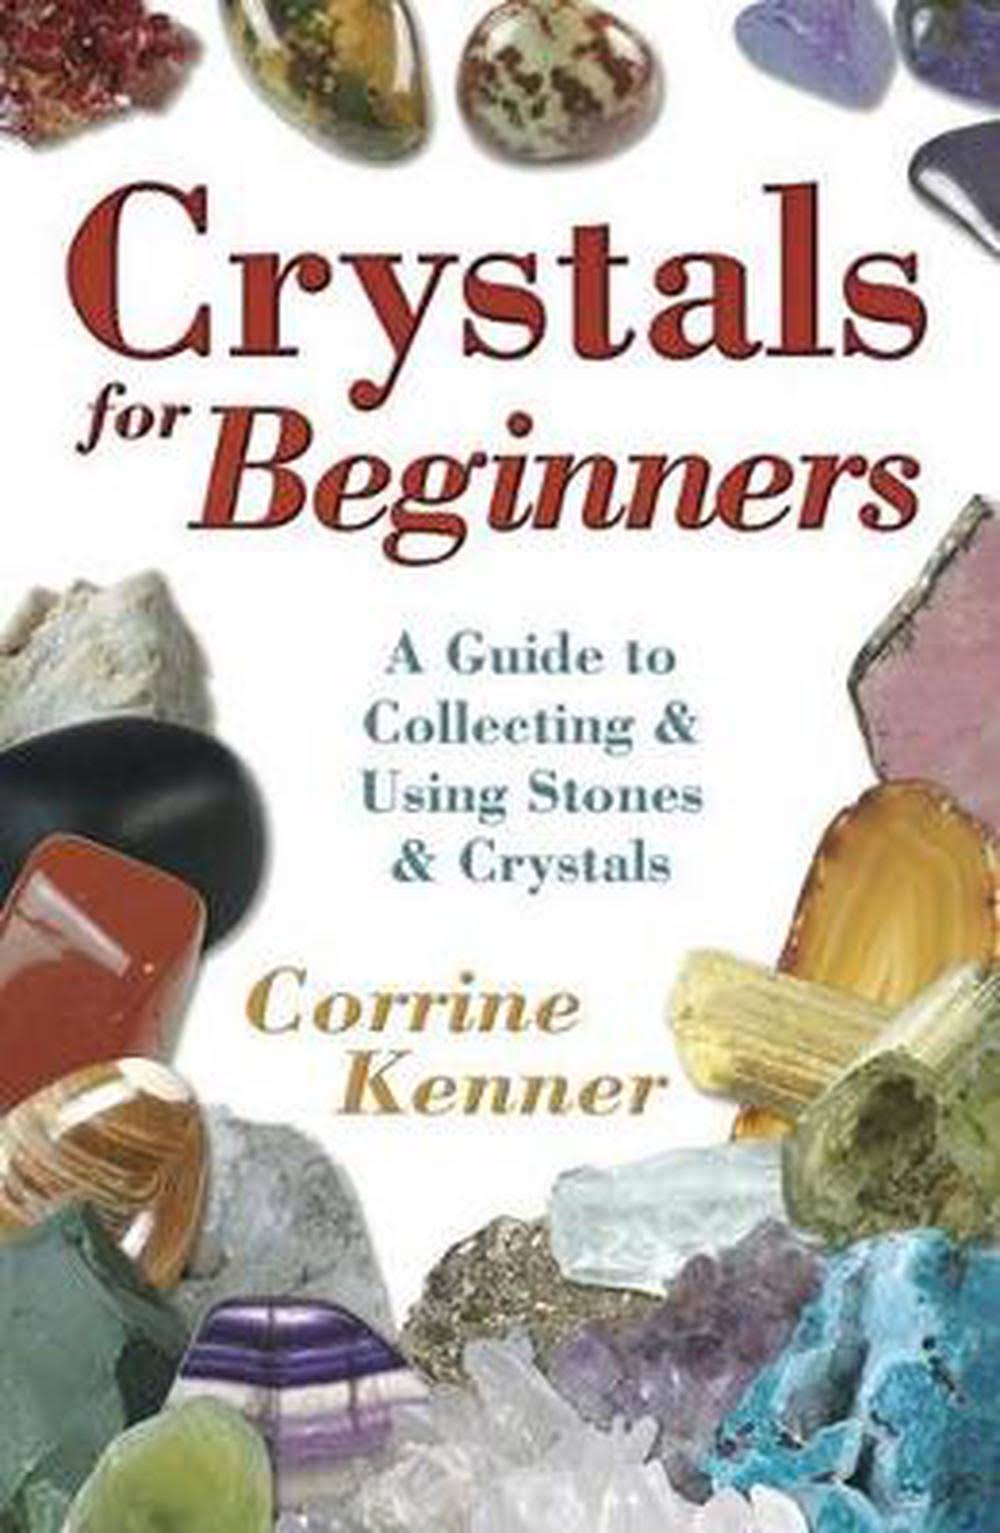 Crystals for Beginners: A Guide to Collecting & Using Stones & Crystals [Book]